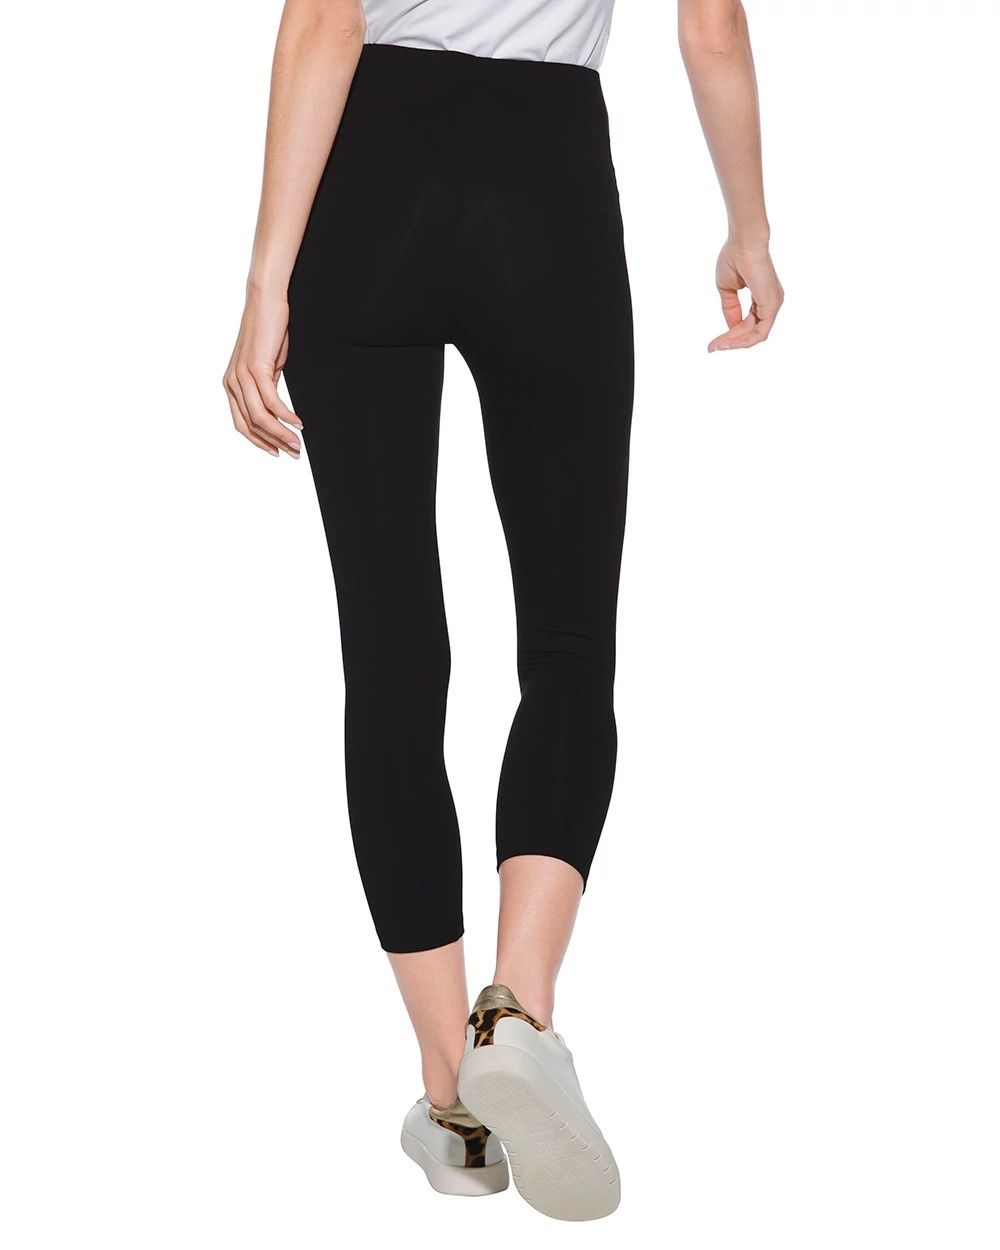 Outlet WHBM Essential Crop Leggings click to view larger image.